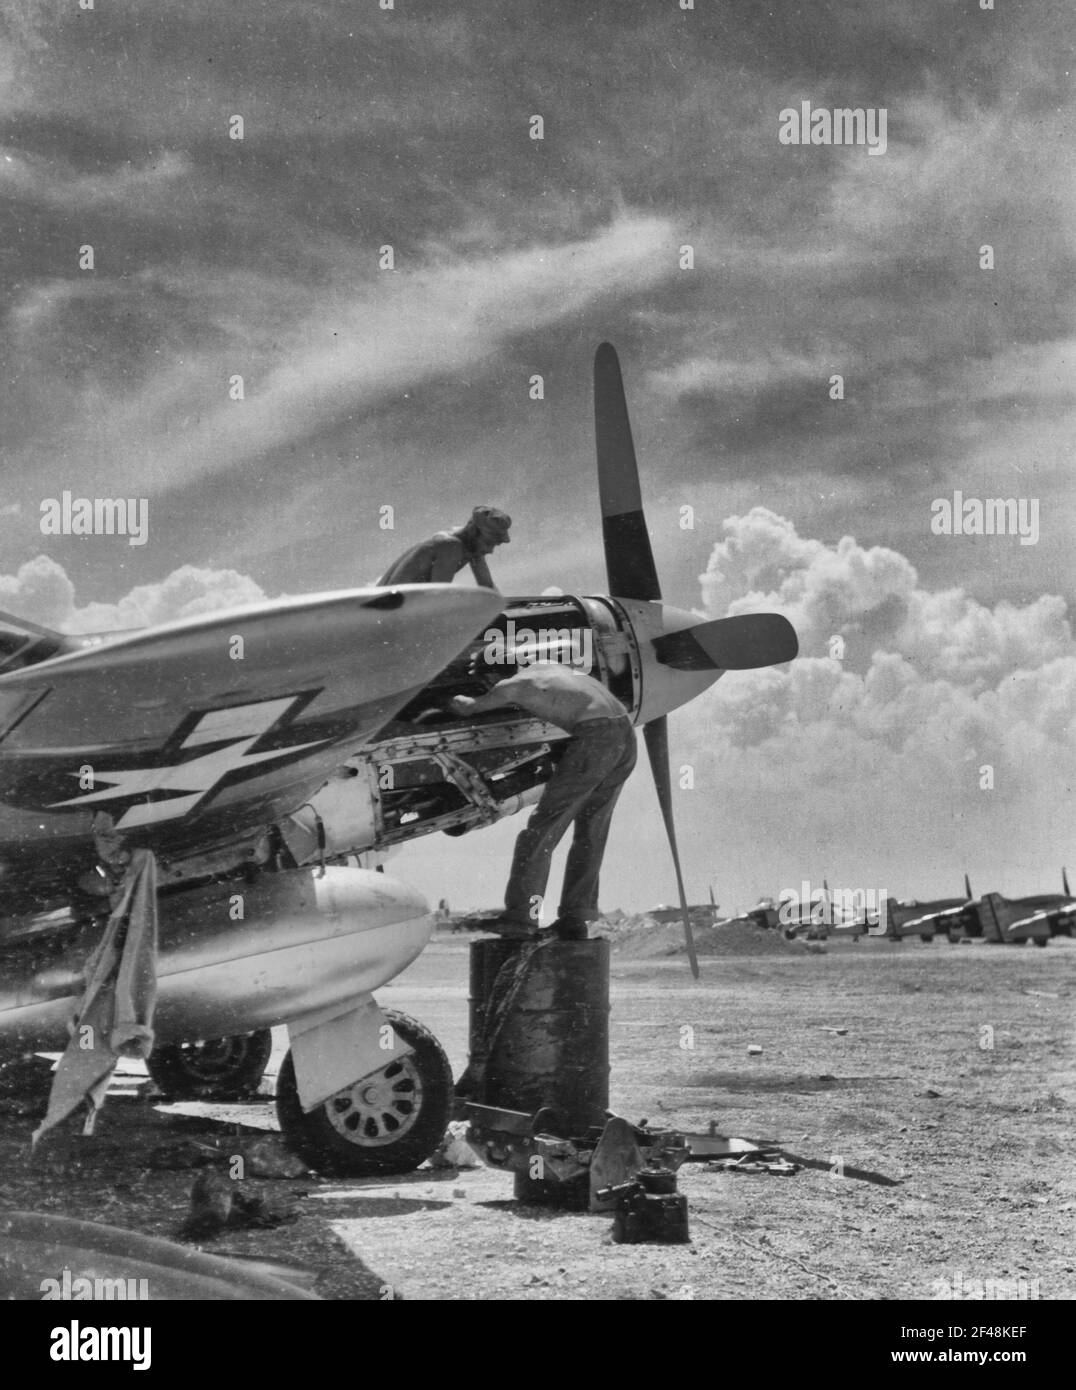 Mechanics Of The 41St Fighter Group Checking North American P-51 'Mustang' For Mission Over Enemy Territory. Yontan Airfield, Okinawa, Ryukyu Retto. July 1945 Stock Photo